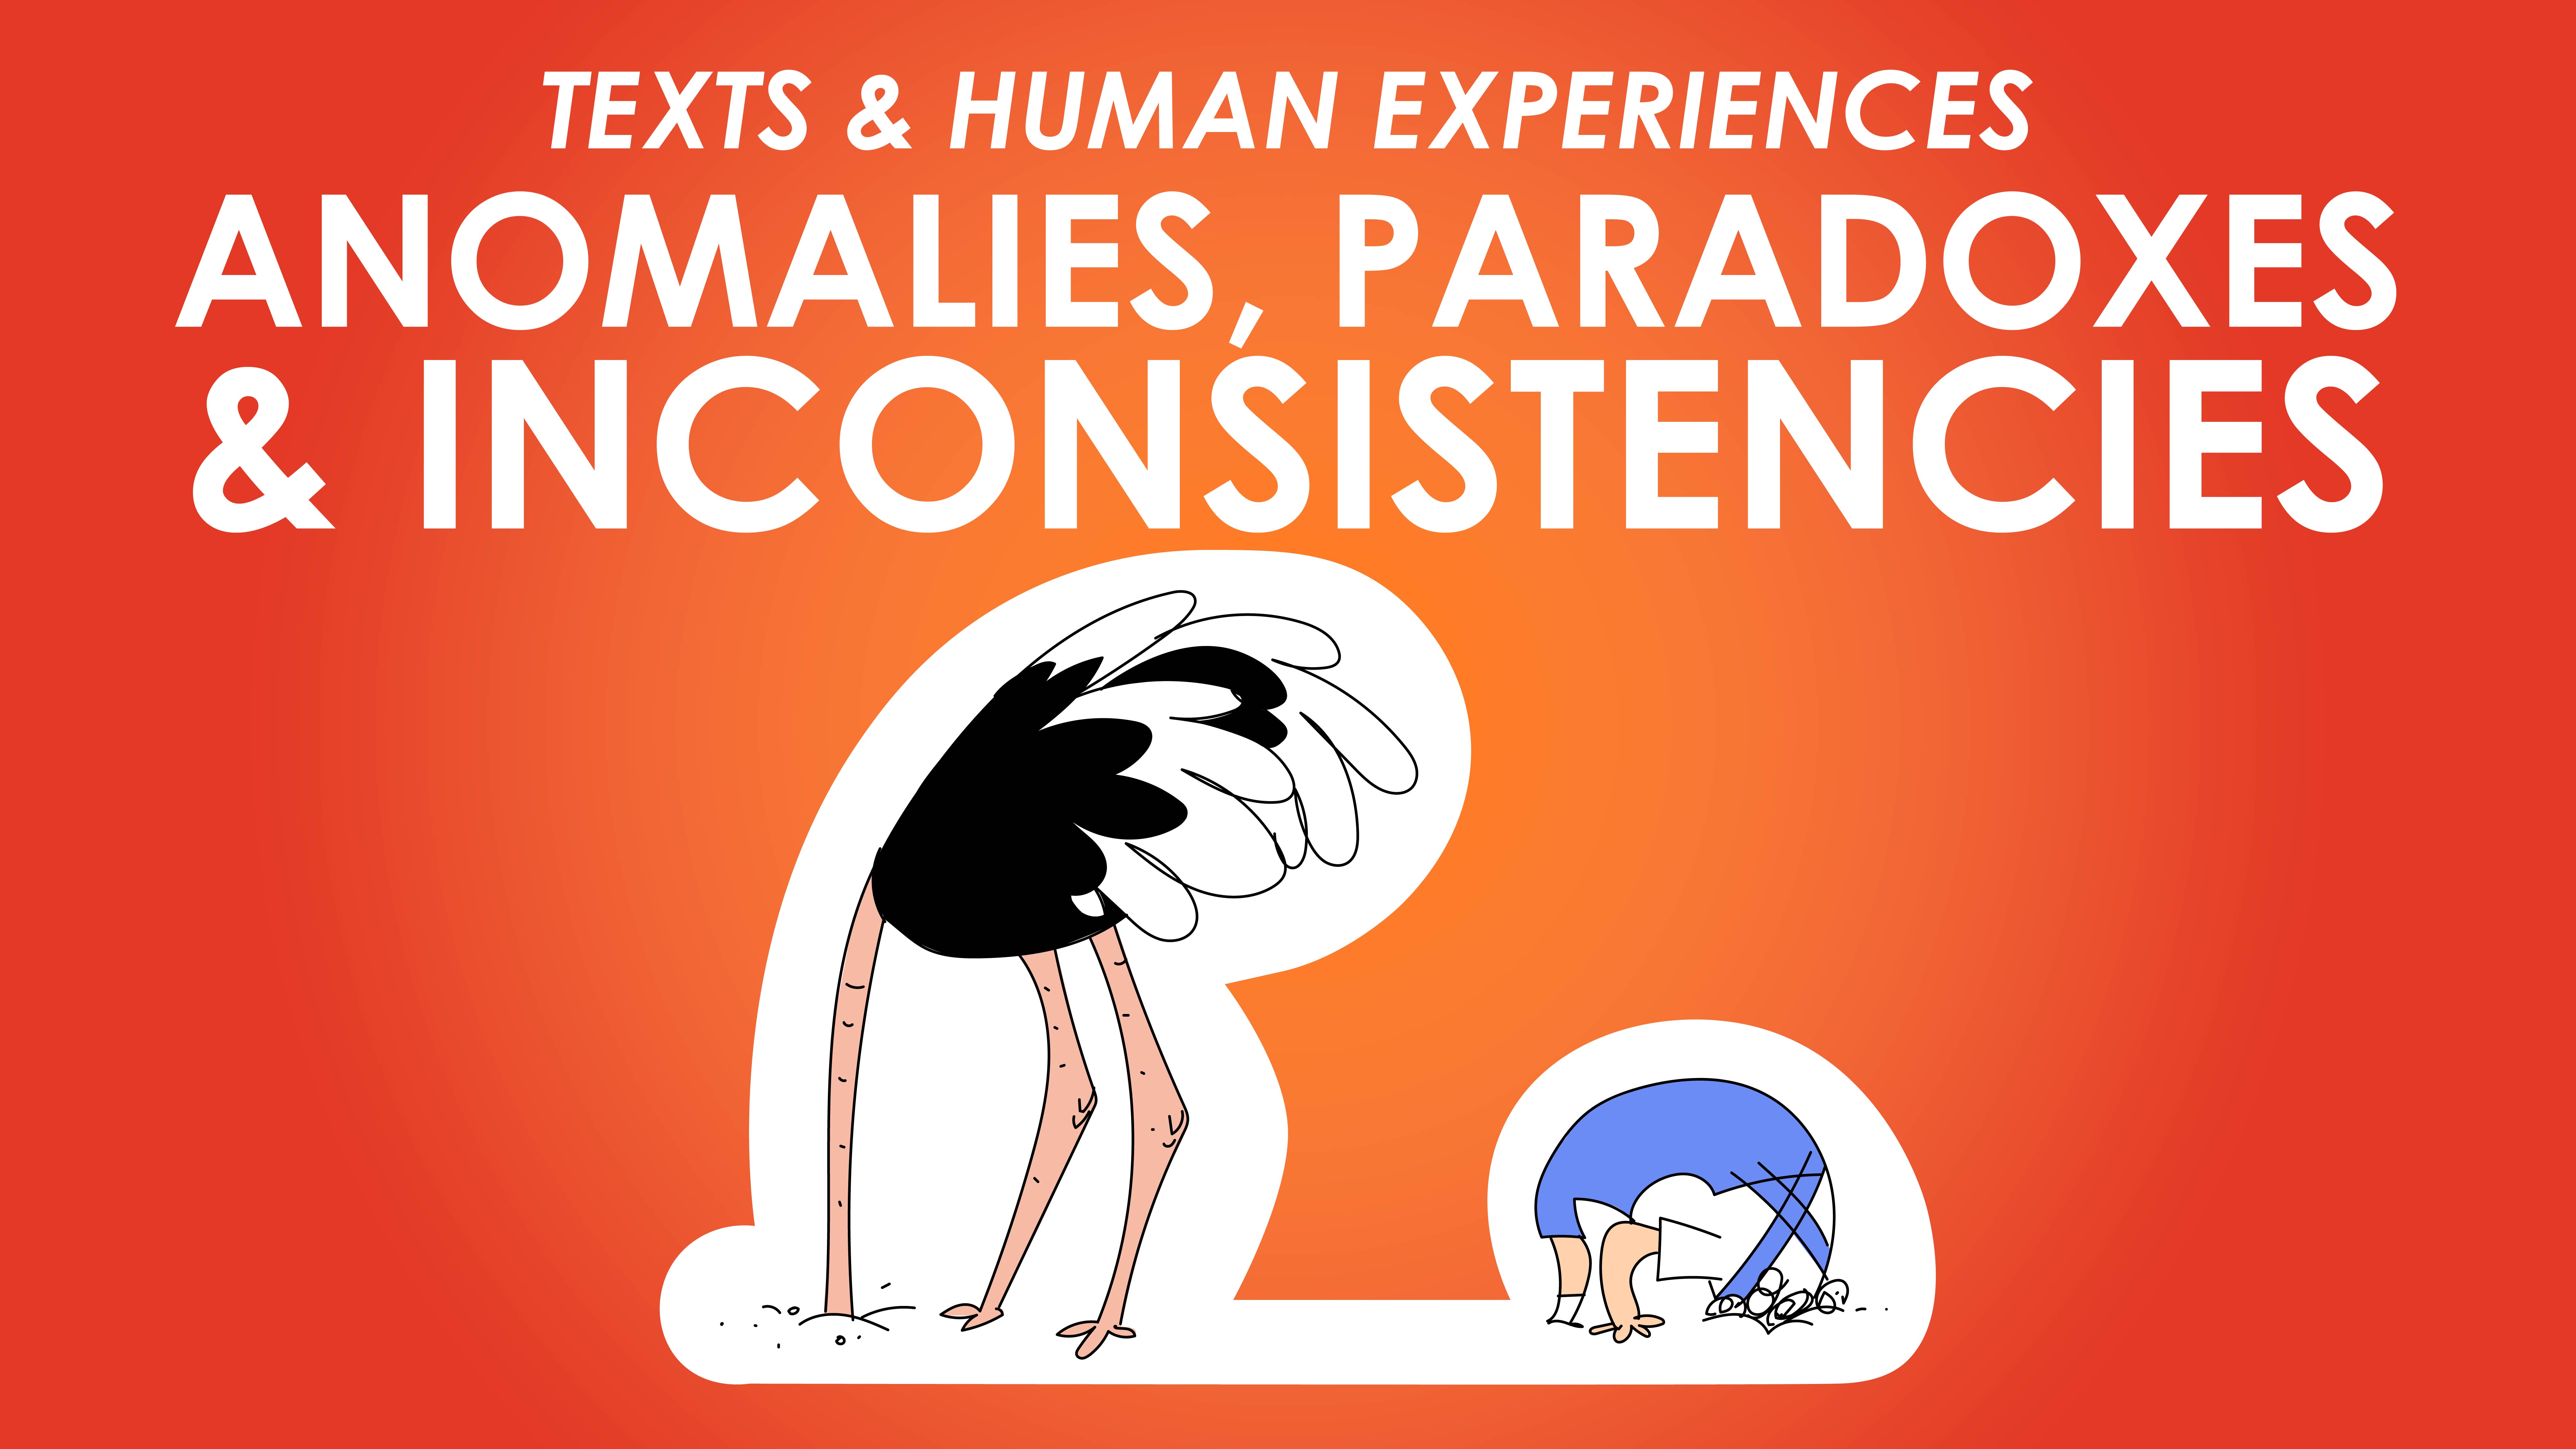 3. HSC Texts and Human Experiences Rubric - Anomalies, Paradoxes and Inconsistencies